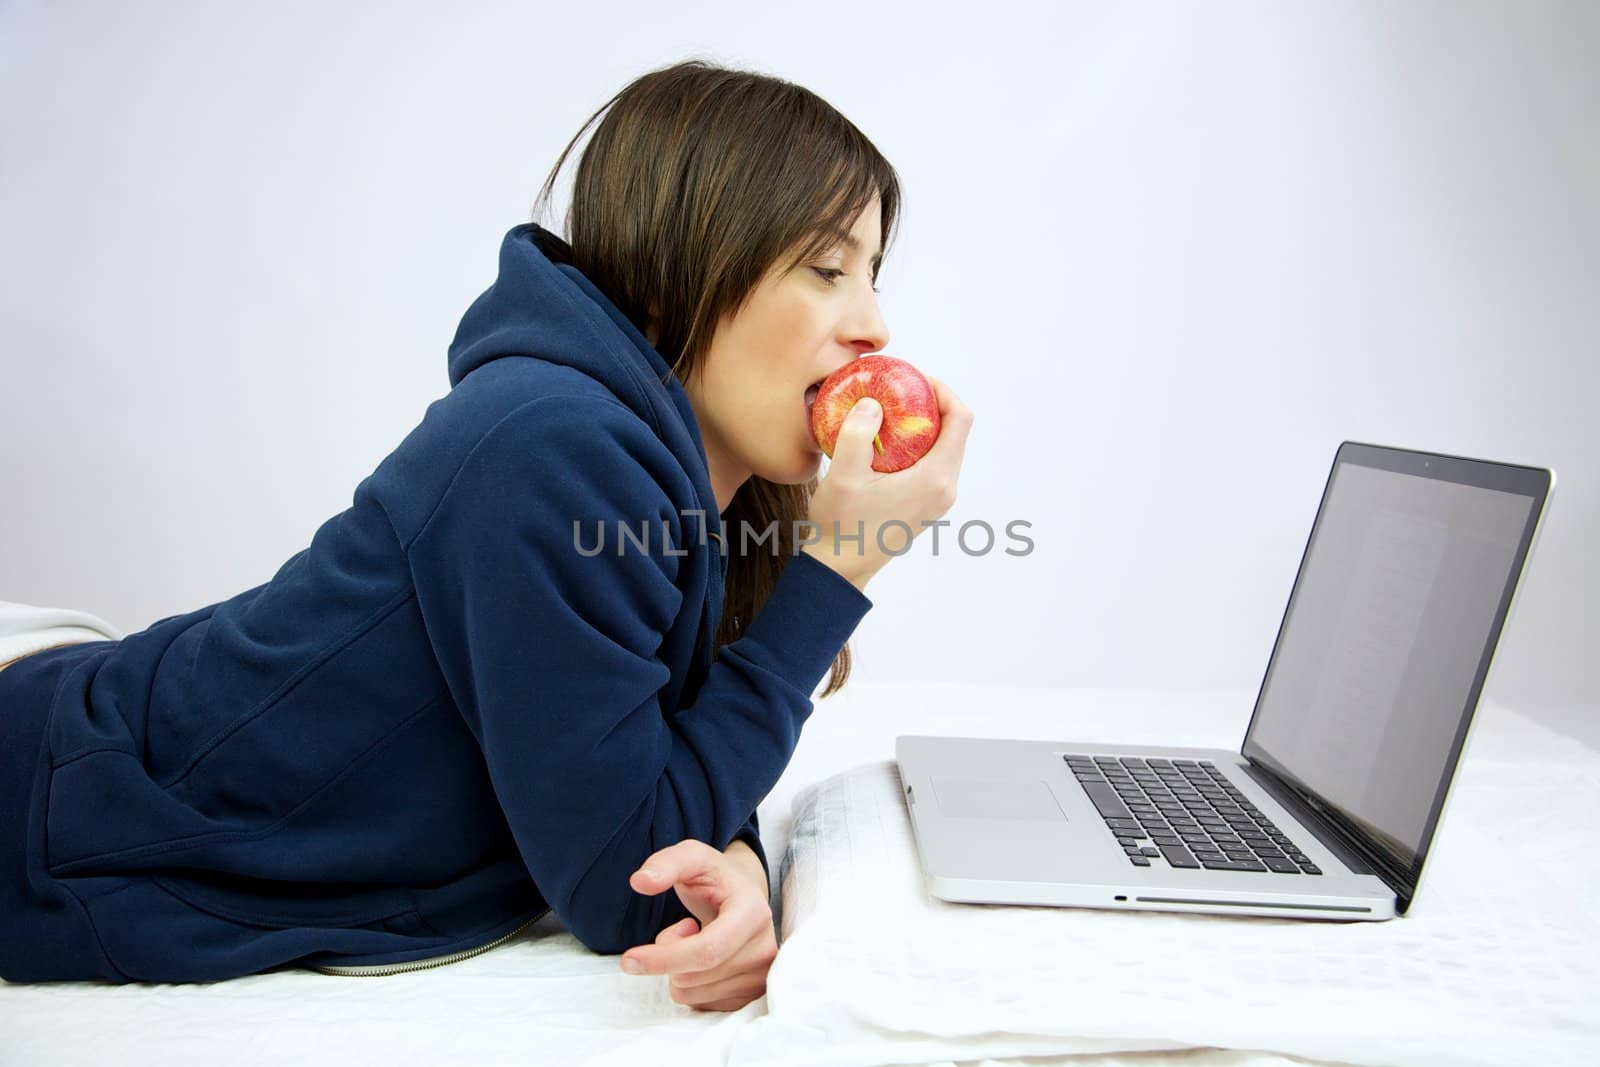 Woman eating red apple in front of computer laying in bed by fmarsicano